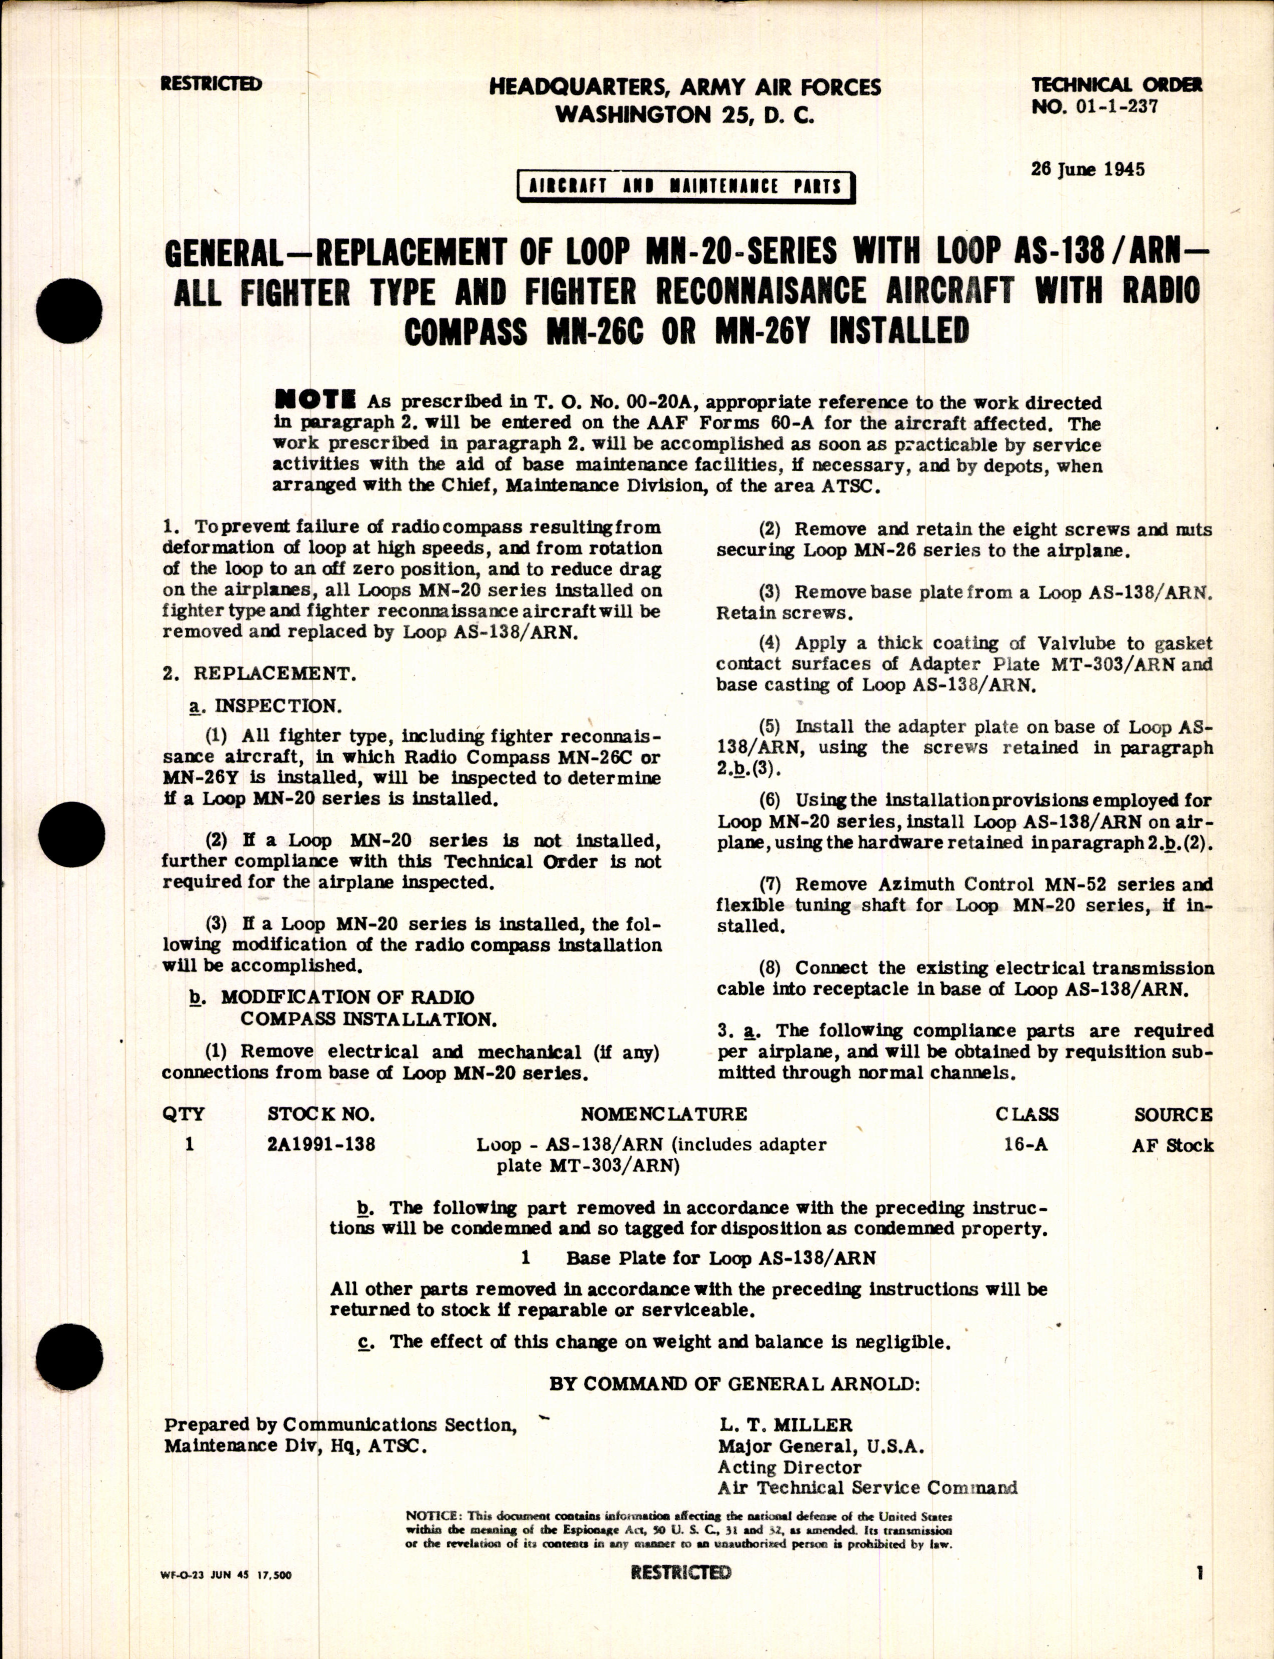 Sample page 1 from AirCorps Library document: Replacement of Loop MN-20 Series with Loop AS-138/ARN